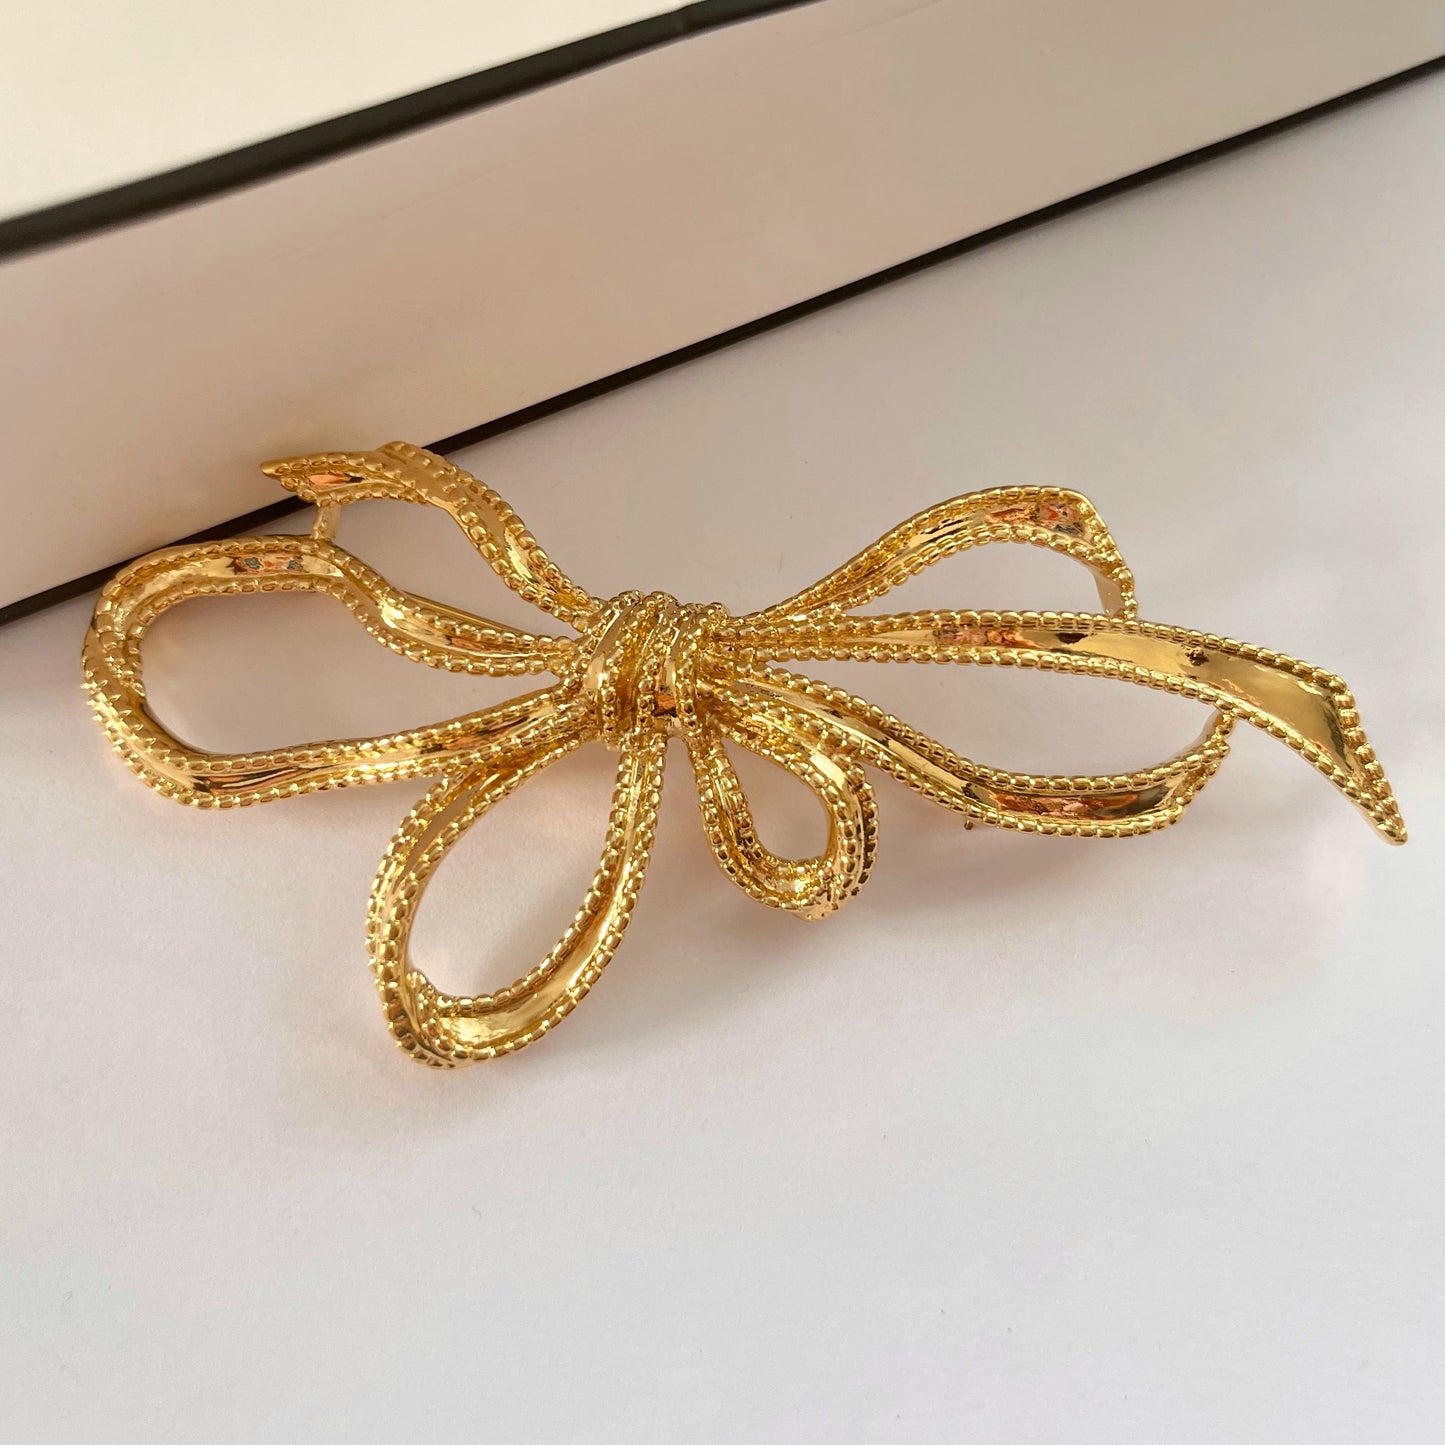 1980s Trifari Gold Plated Large Statement Ribbon Bow Brooch